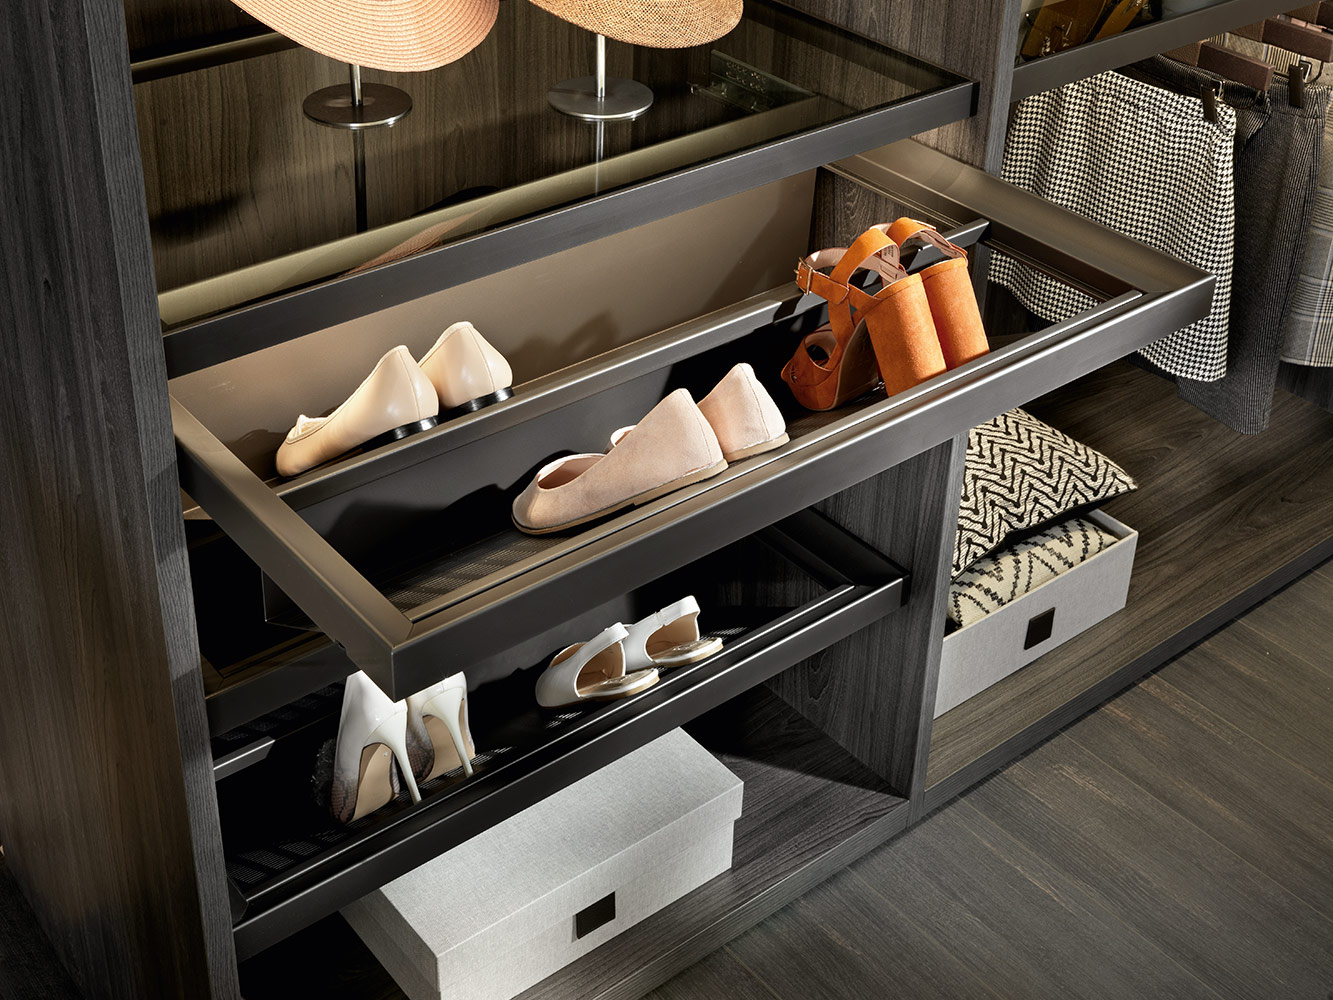 pull out shoe organizer